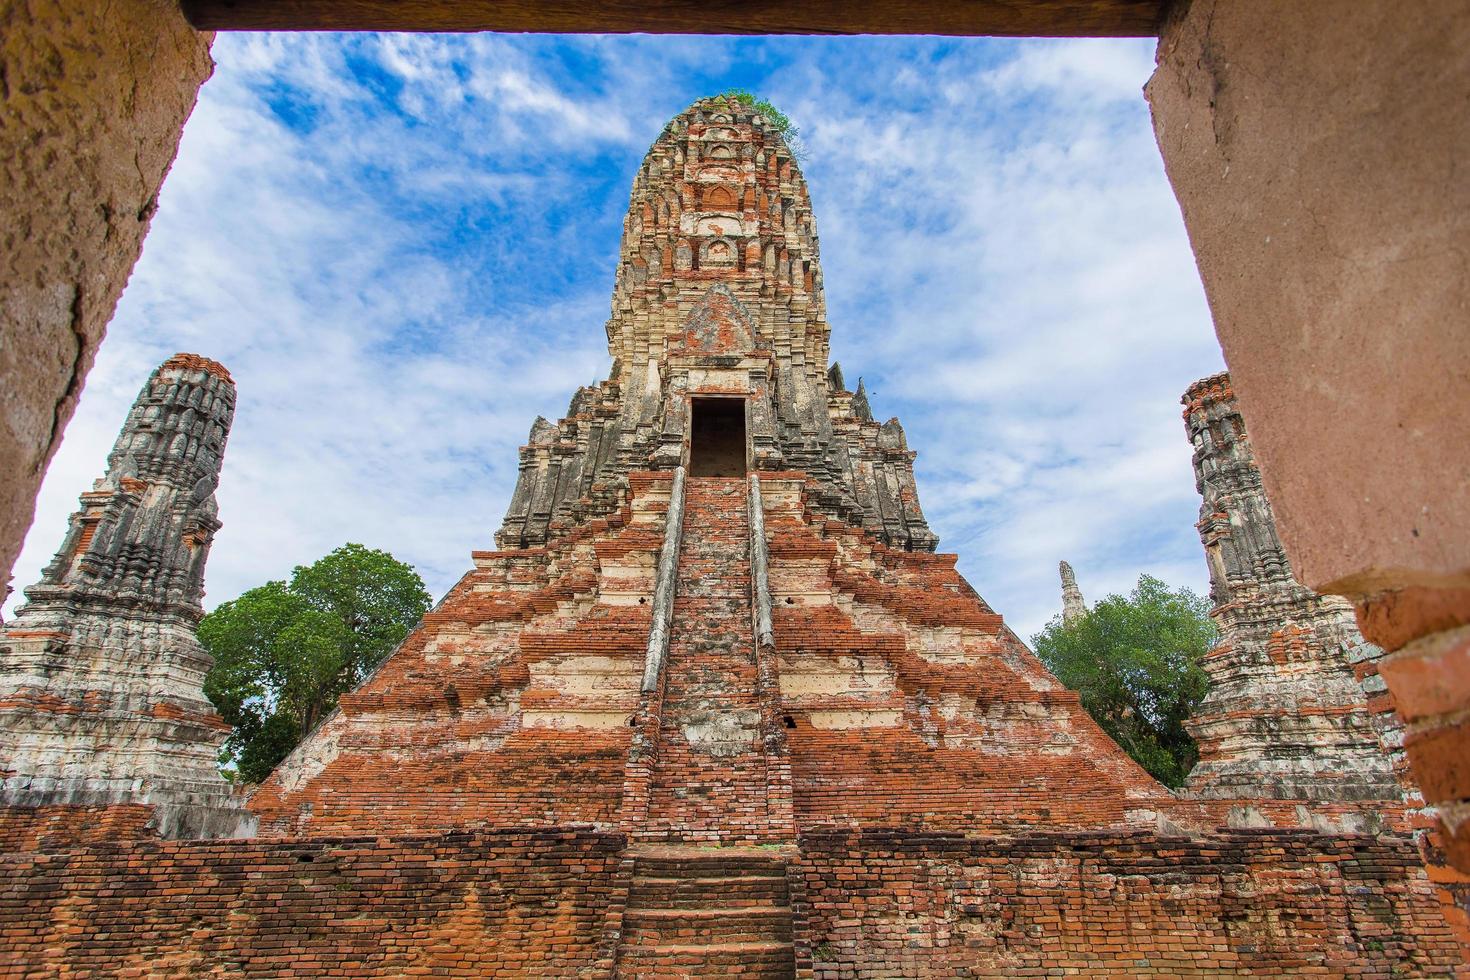 An ancient pagoda built of destroyed bricks located outdoors in Wat Chaiwatthanaram is a major tourist attraction in Phra Nakhon Si Ayutthaya Province, Thailand photo